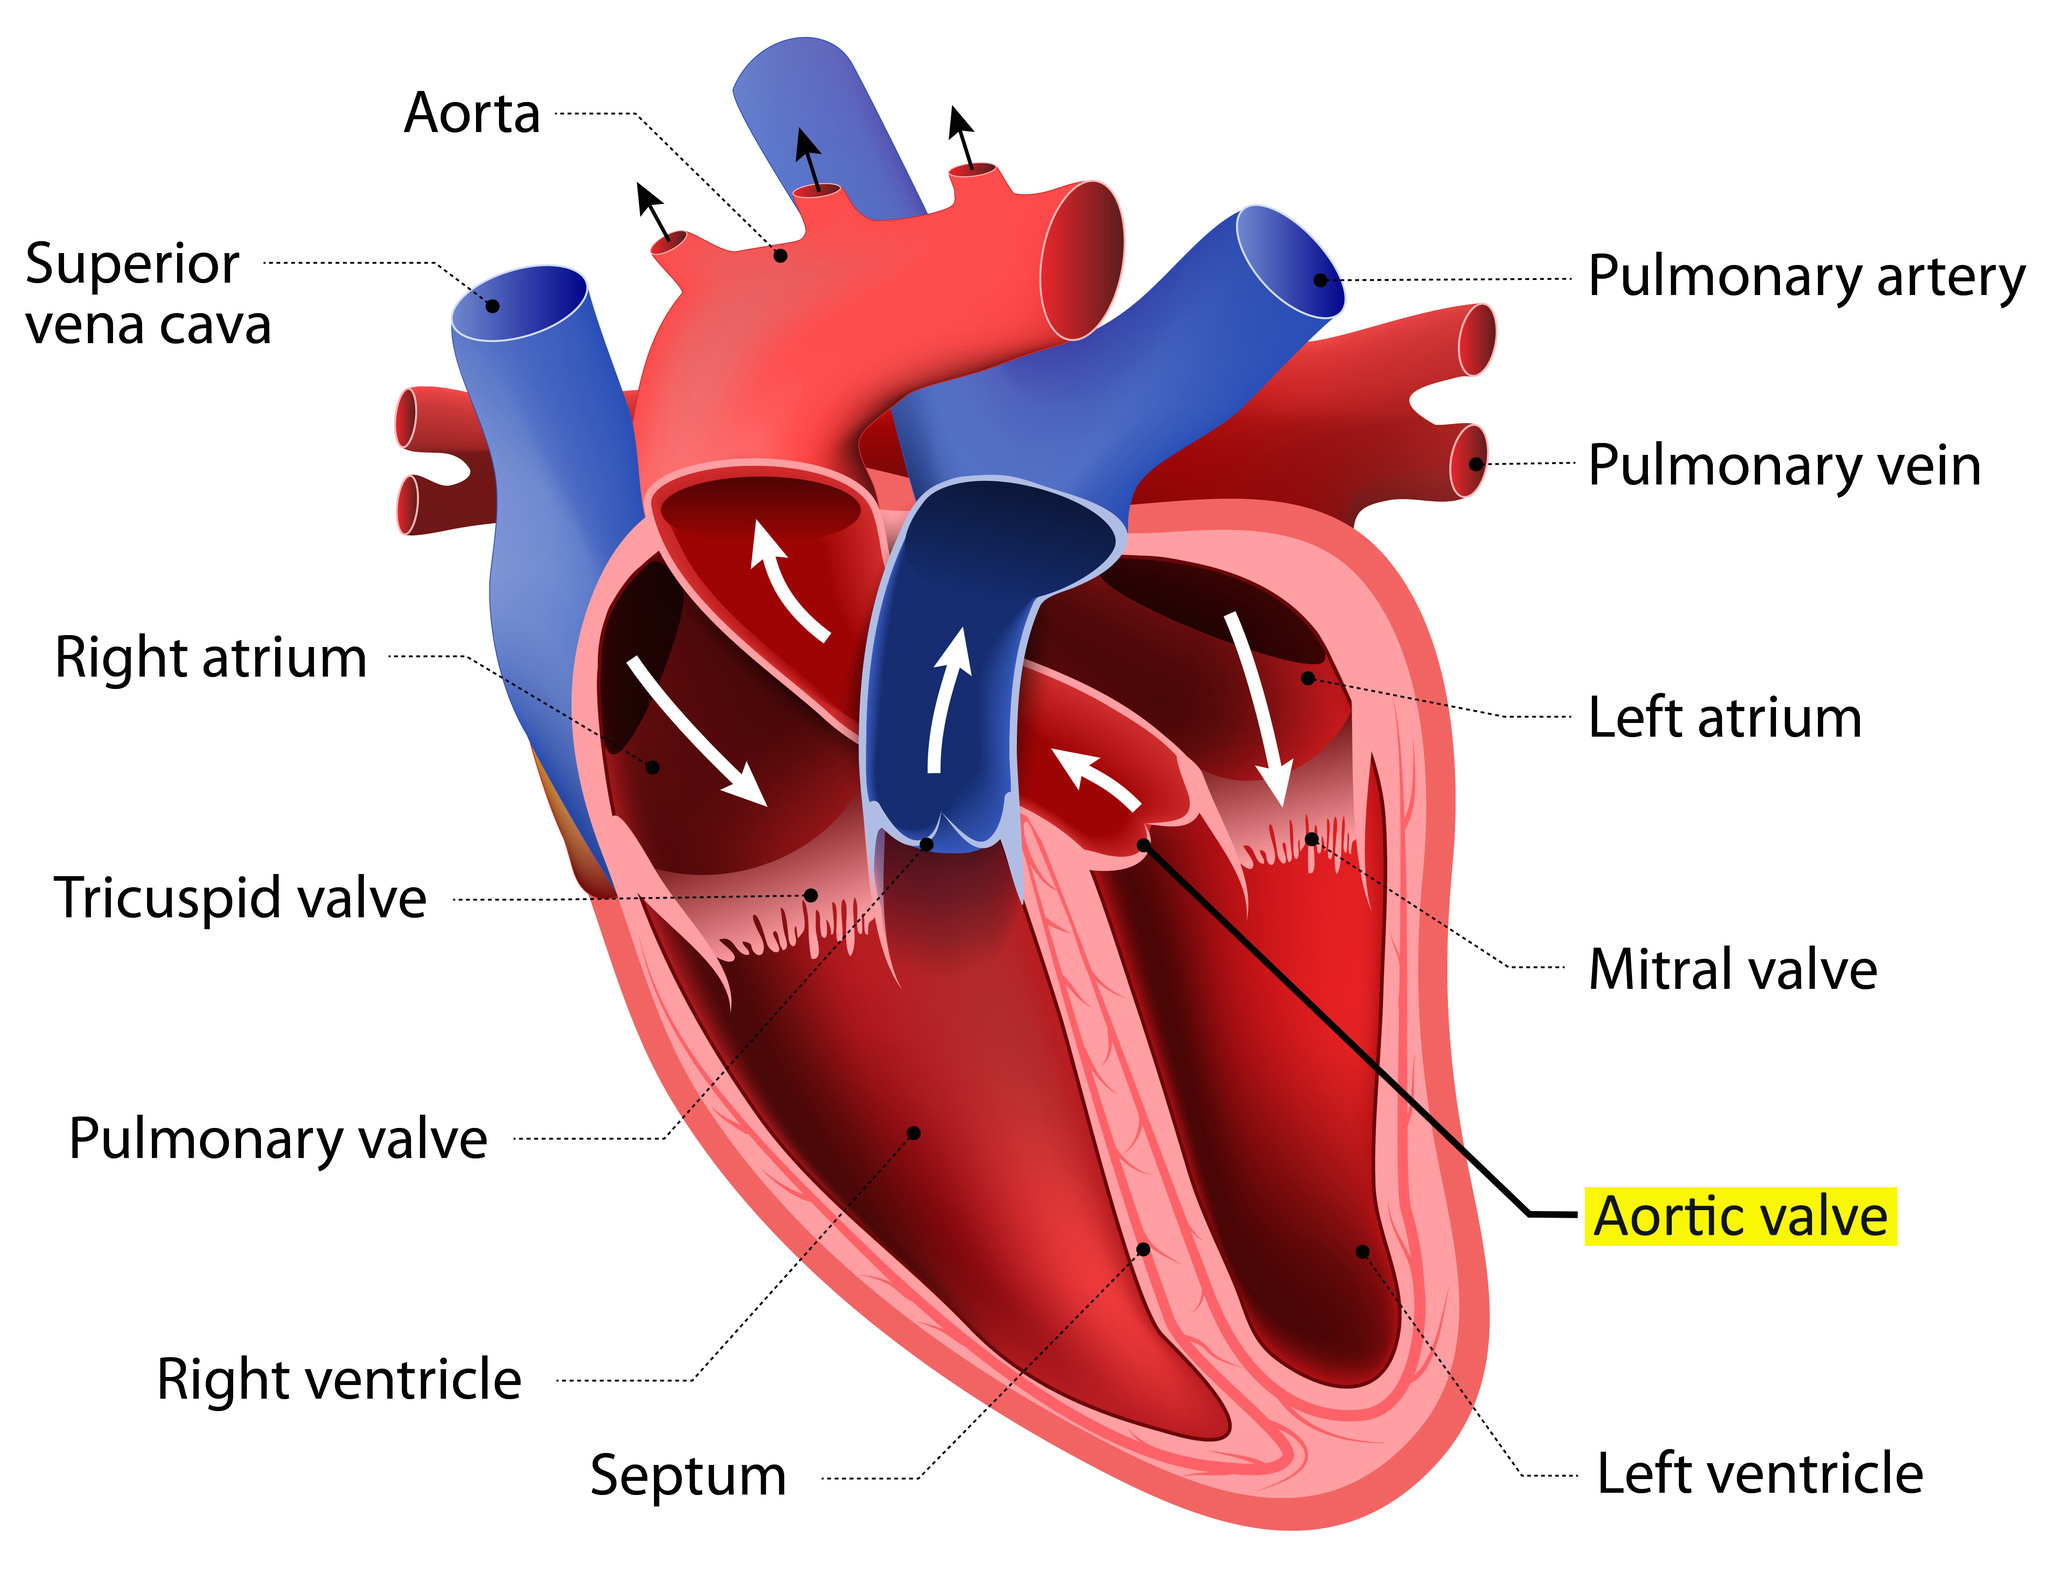 Transcatheter aortic valve replacement (TAVR) is used to repair aortic stenosis, a condition that occurs when the aortic valve narrows, limiting blood flow to the heart.